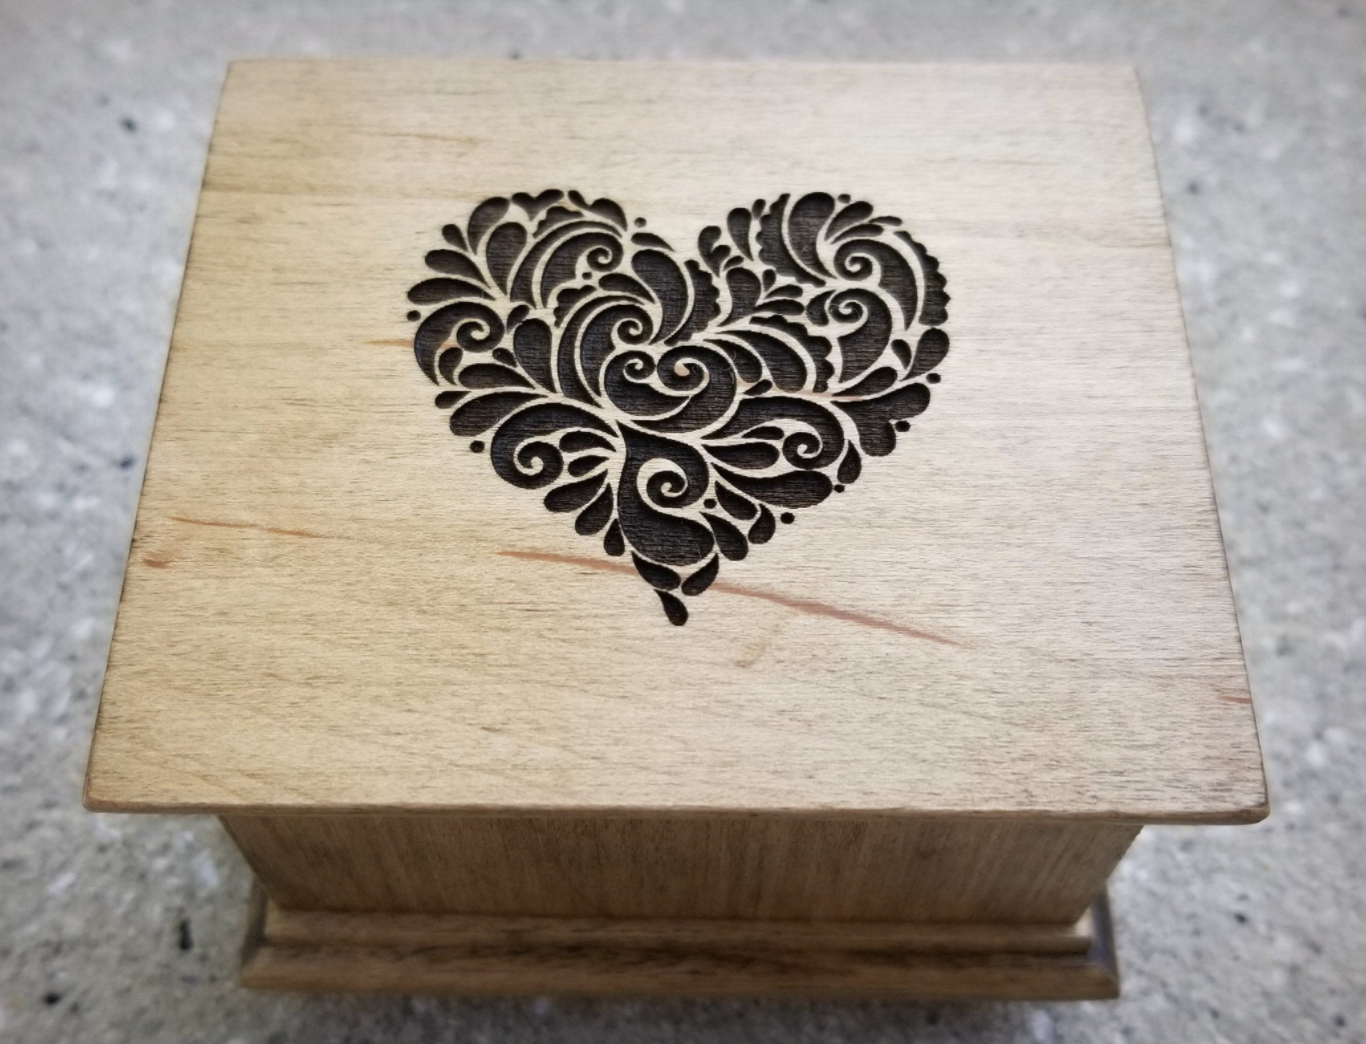 the wooden music box with a carving of a heart on it